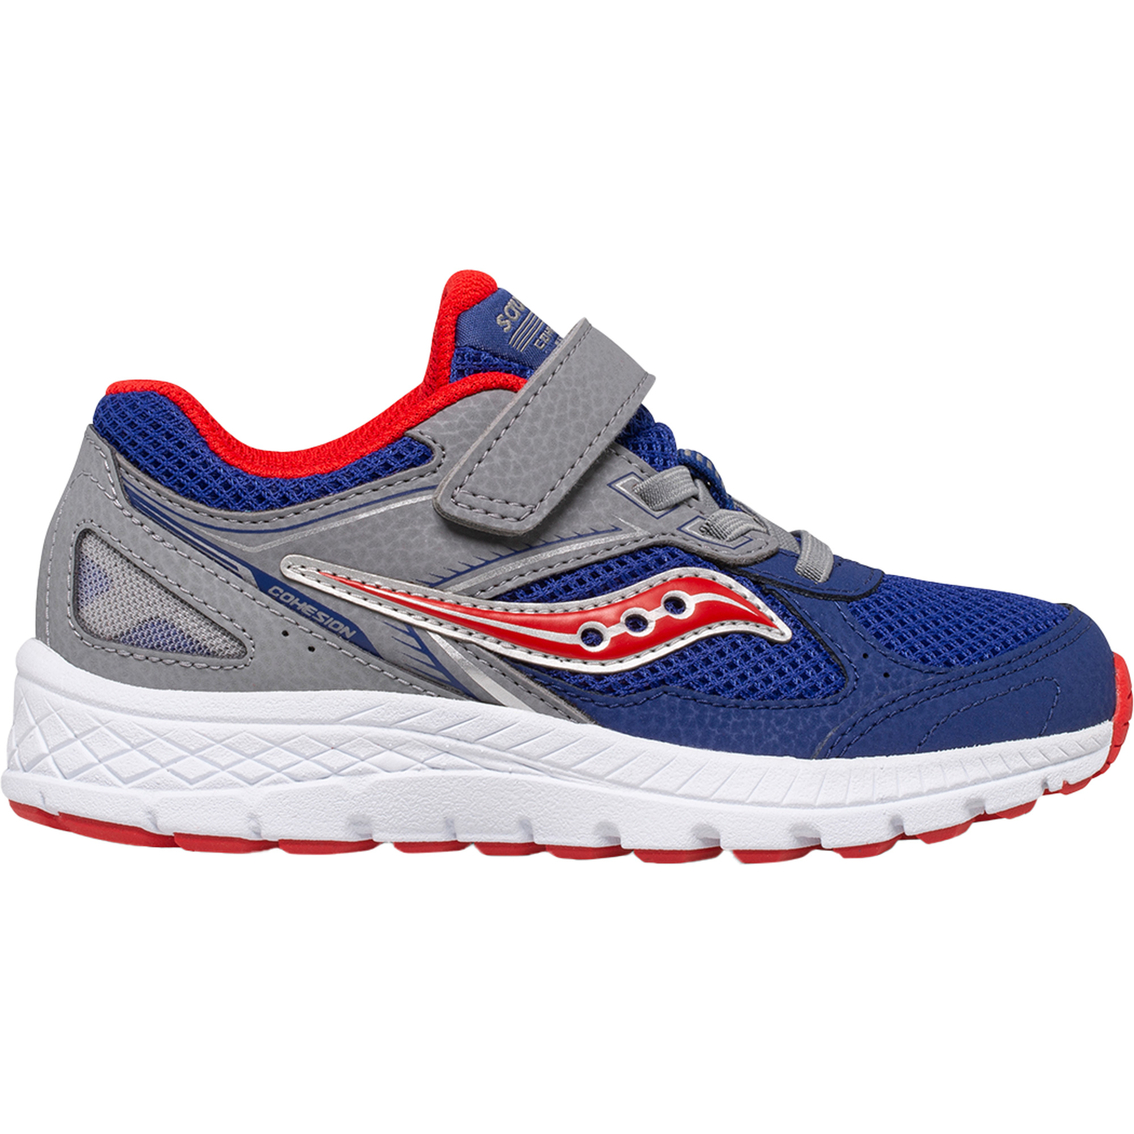 Saucony Preschool Boys Cohesion 14 A/c Sneakers | Sneakers | Shoes ...